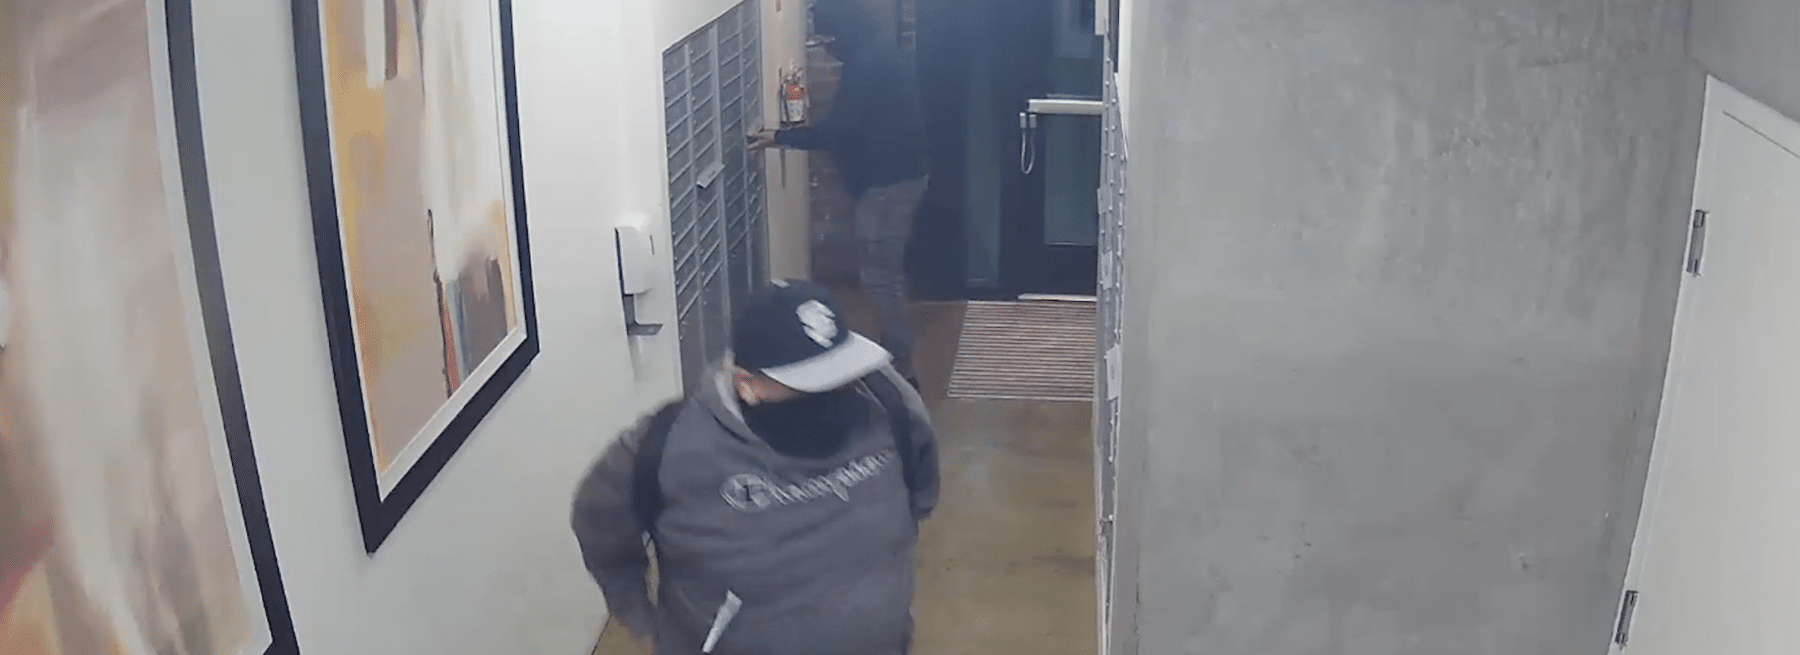 Masked suspects in apartment community